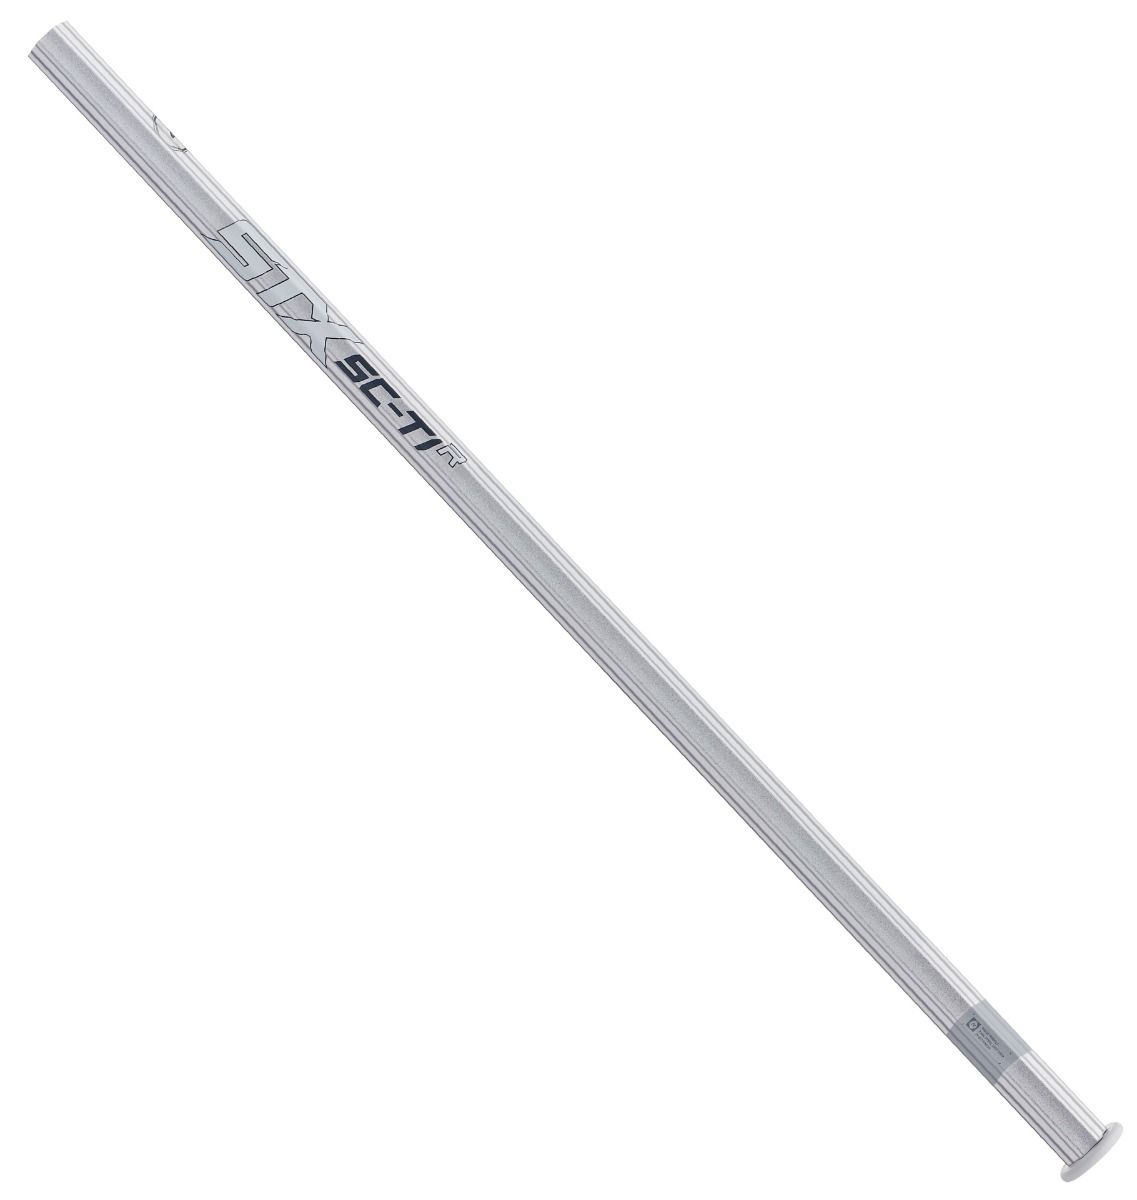 Lacrosse ScTi Raw Alloy A/M Handle Attack Lacrosse Shaft 